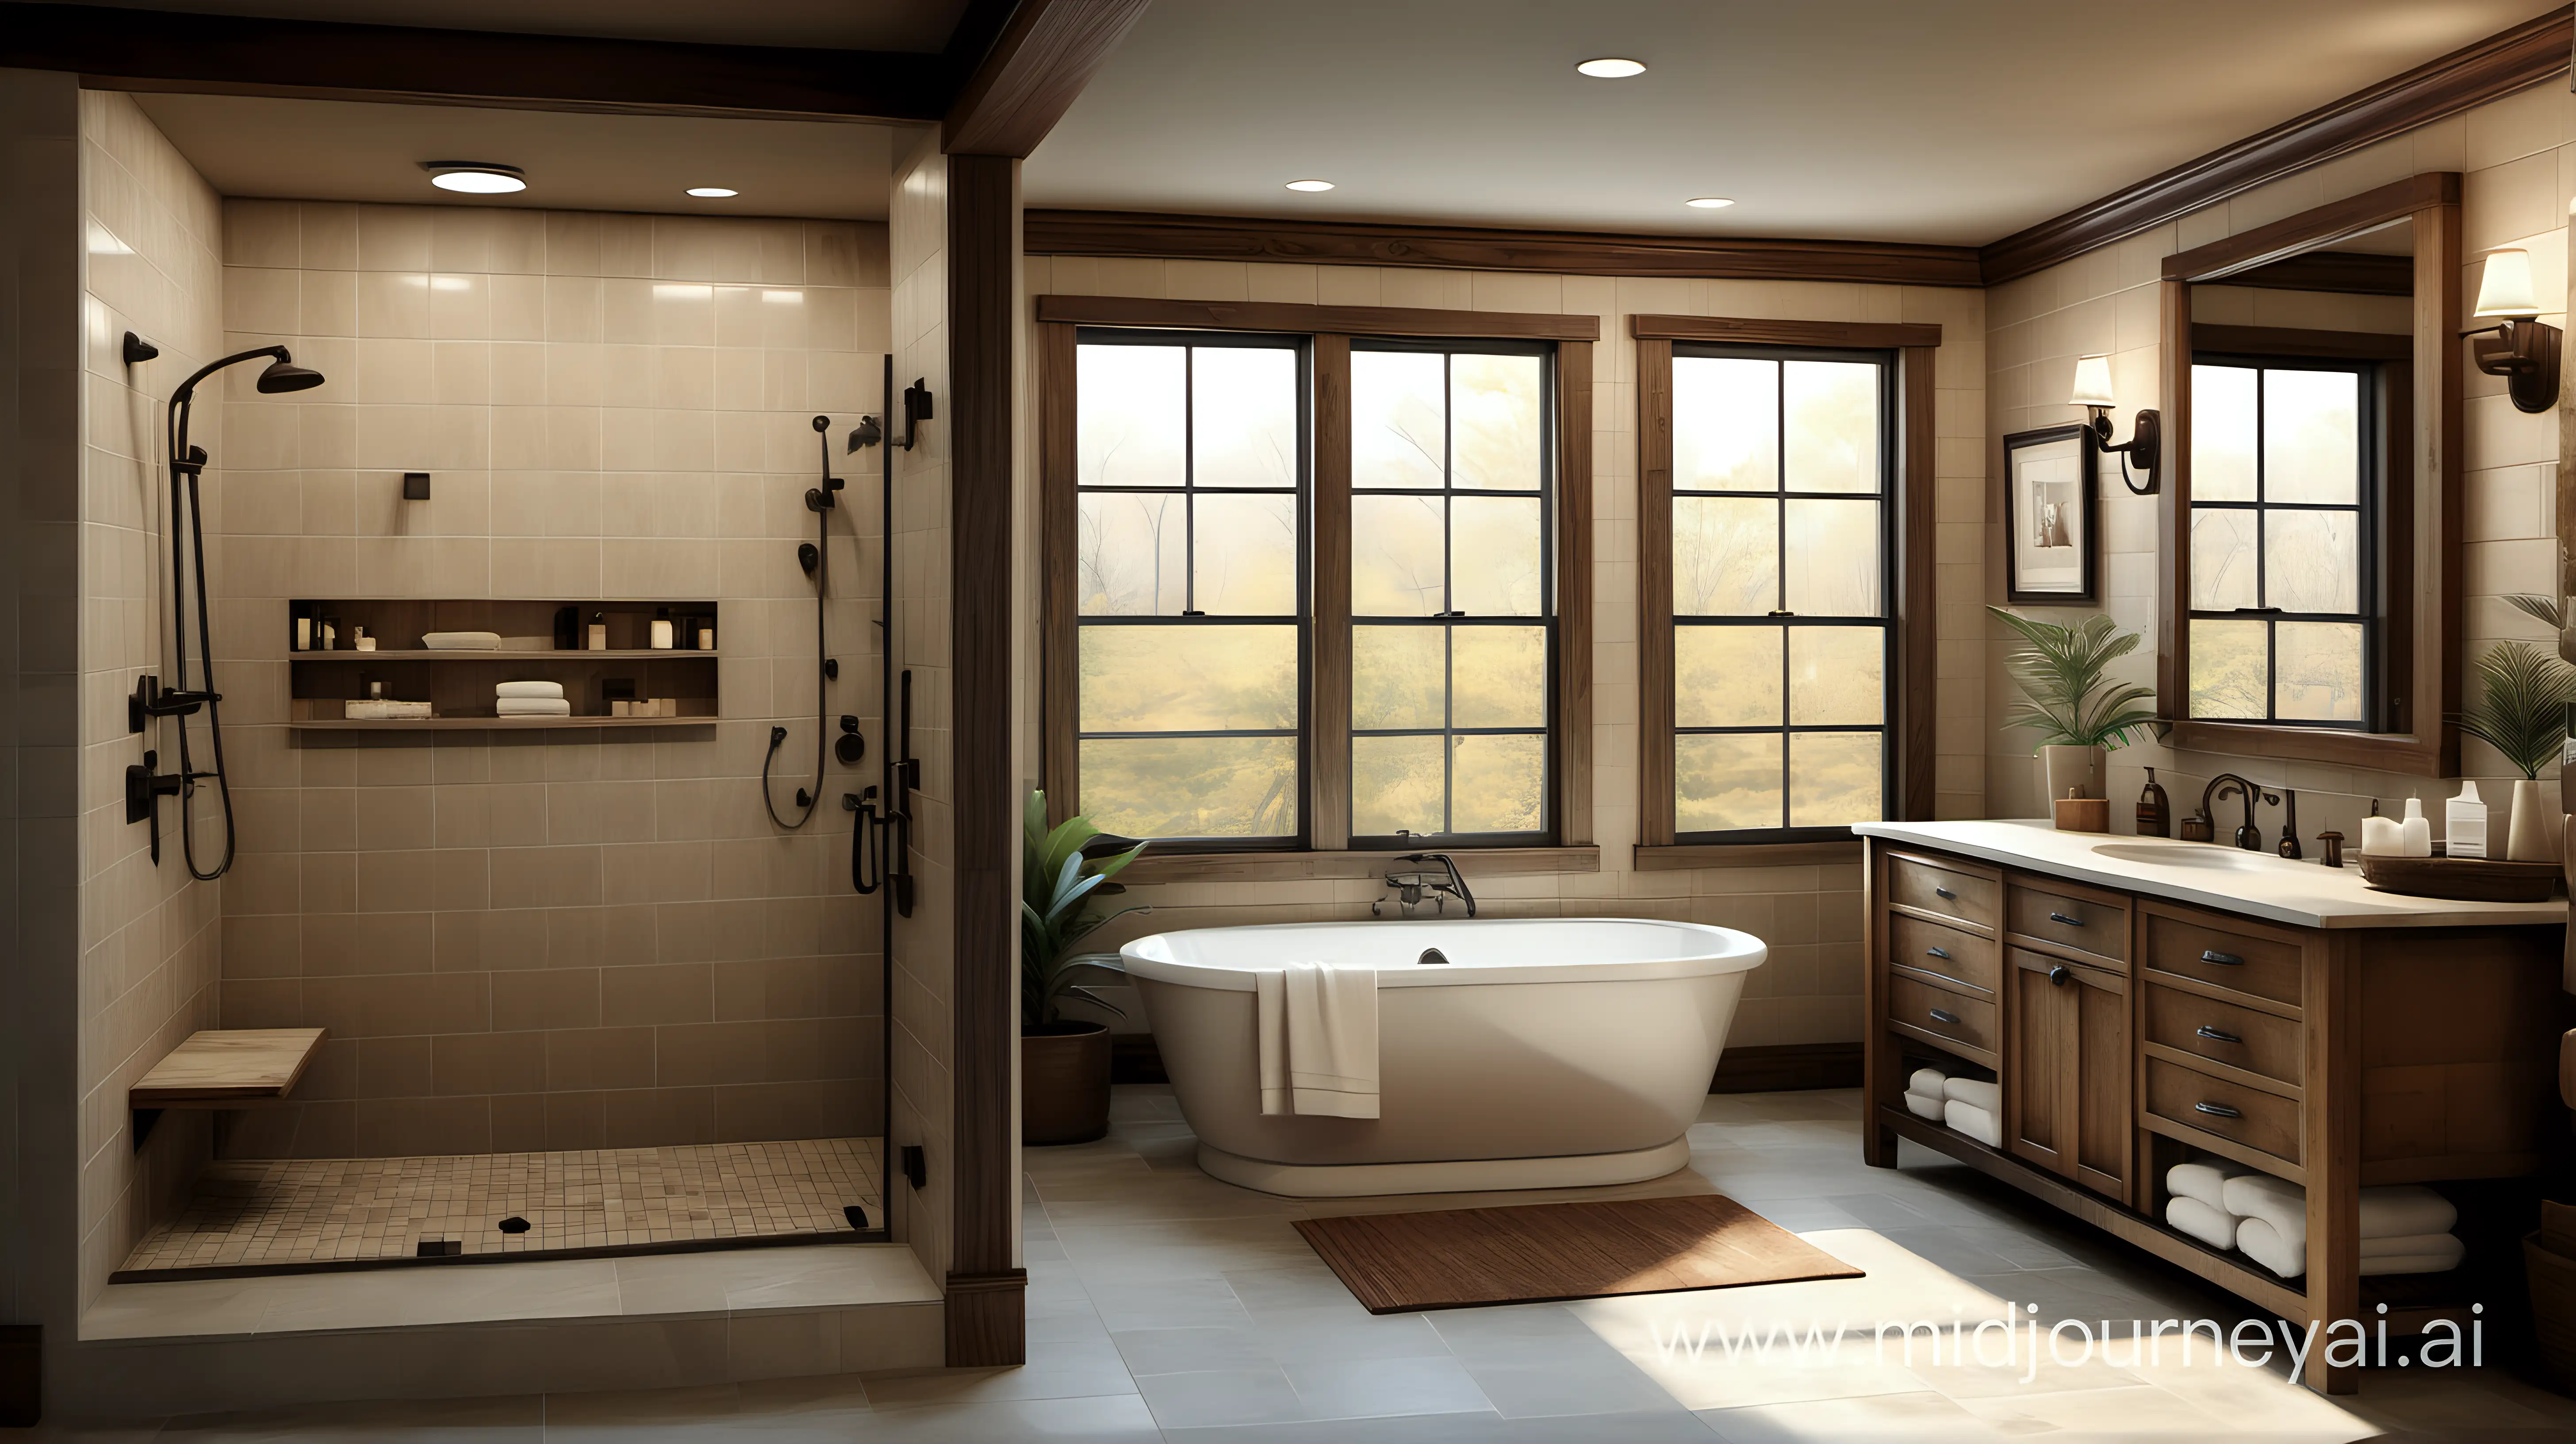 photorealistic, large bathroom, rustic cabin style home, walk-in shower with beige subway tile centered in composition, tub on the right side of composition, vanity and mirror on the left side of composition, natural window lighting